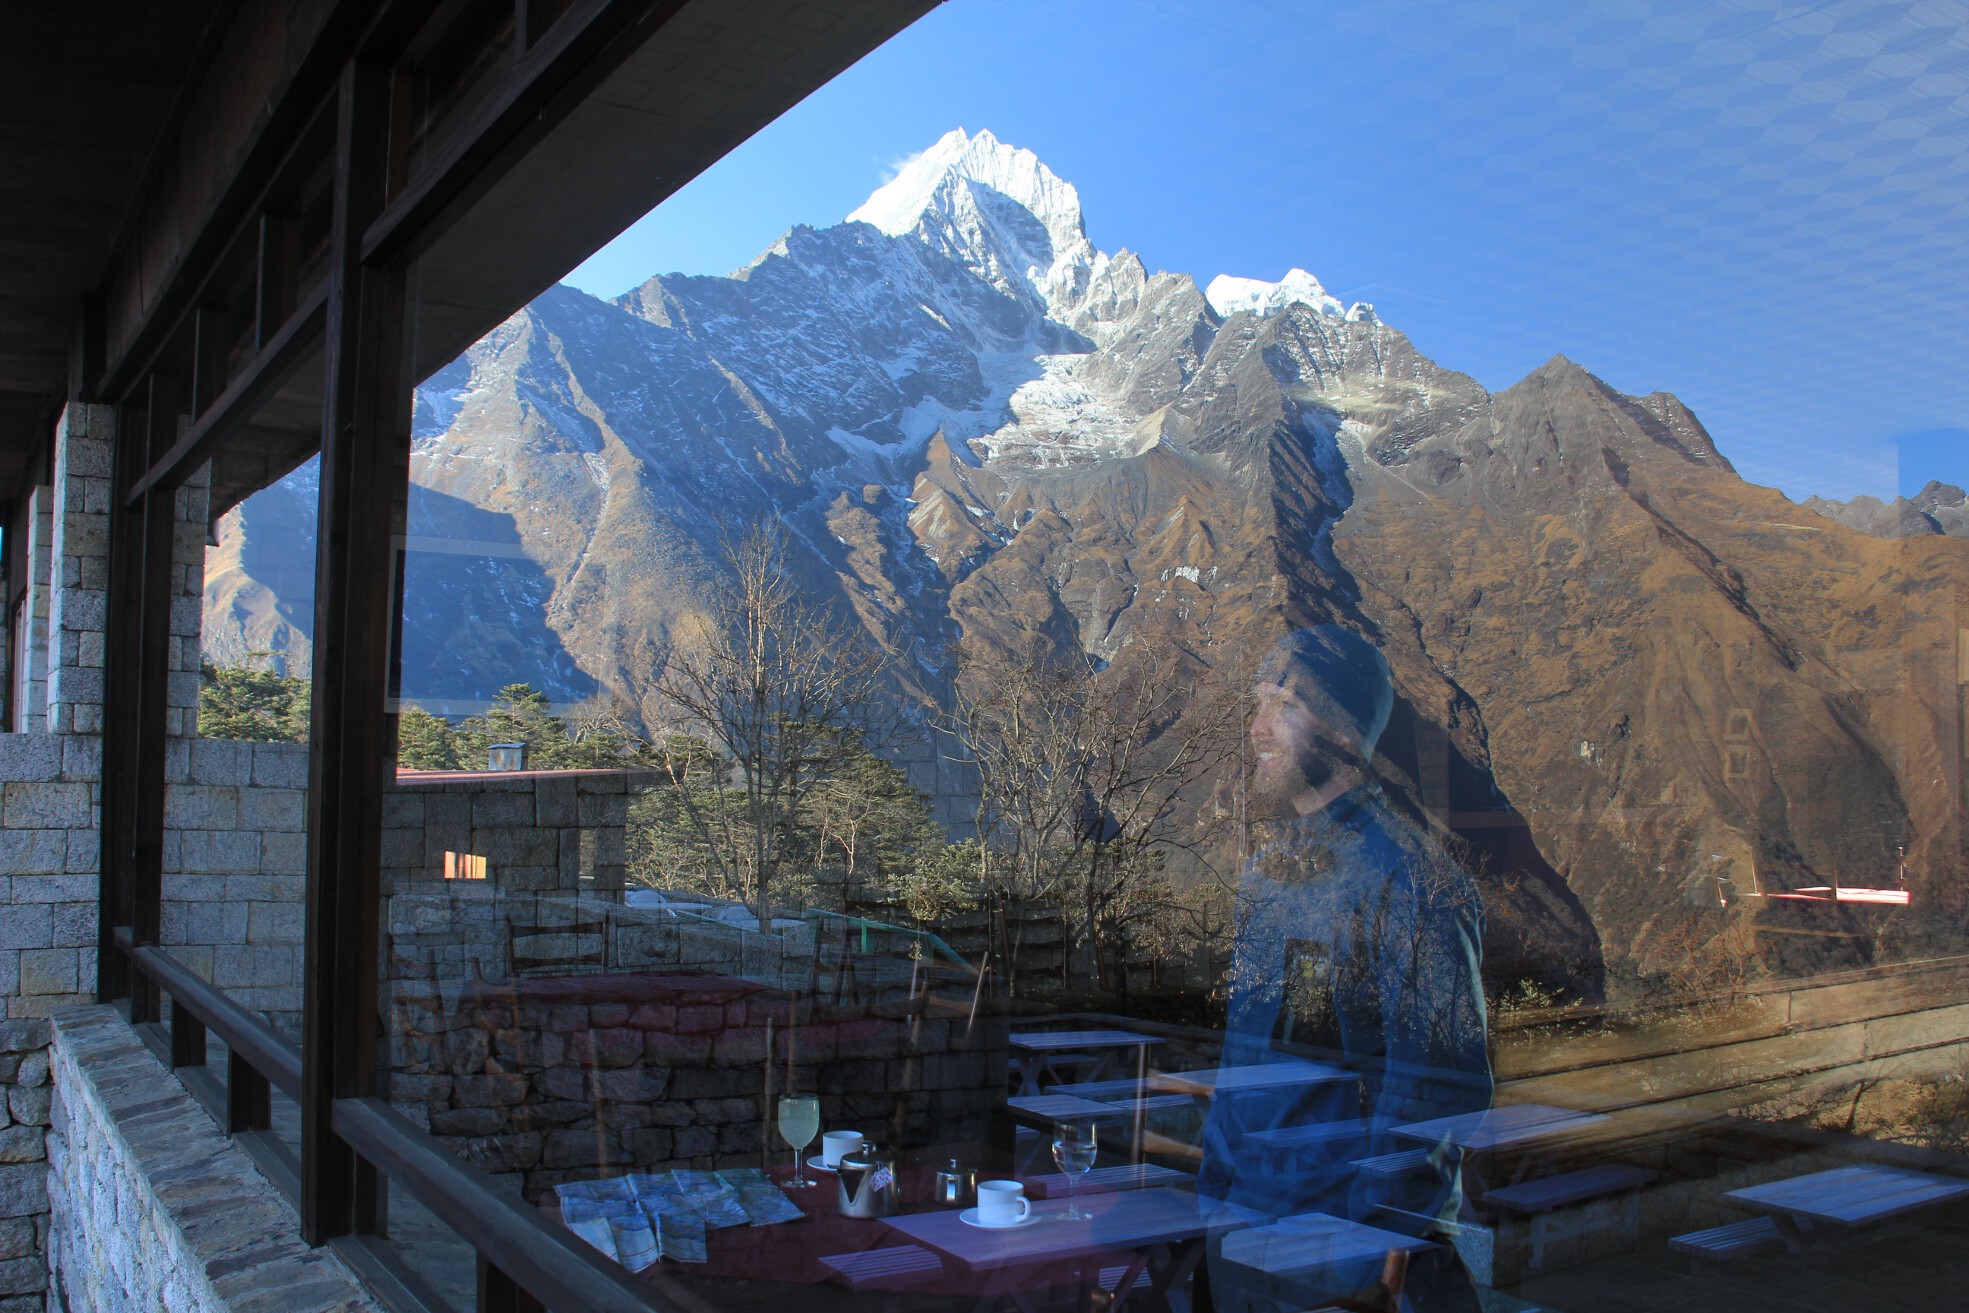 Brian gazes at Mount Everest through the window of the Hotel Everest View above Namche Bazaar, Nepal.